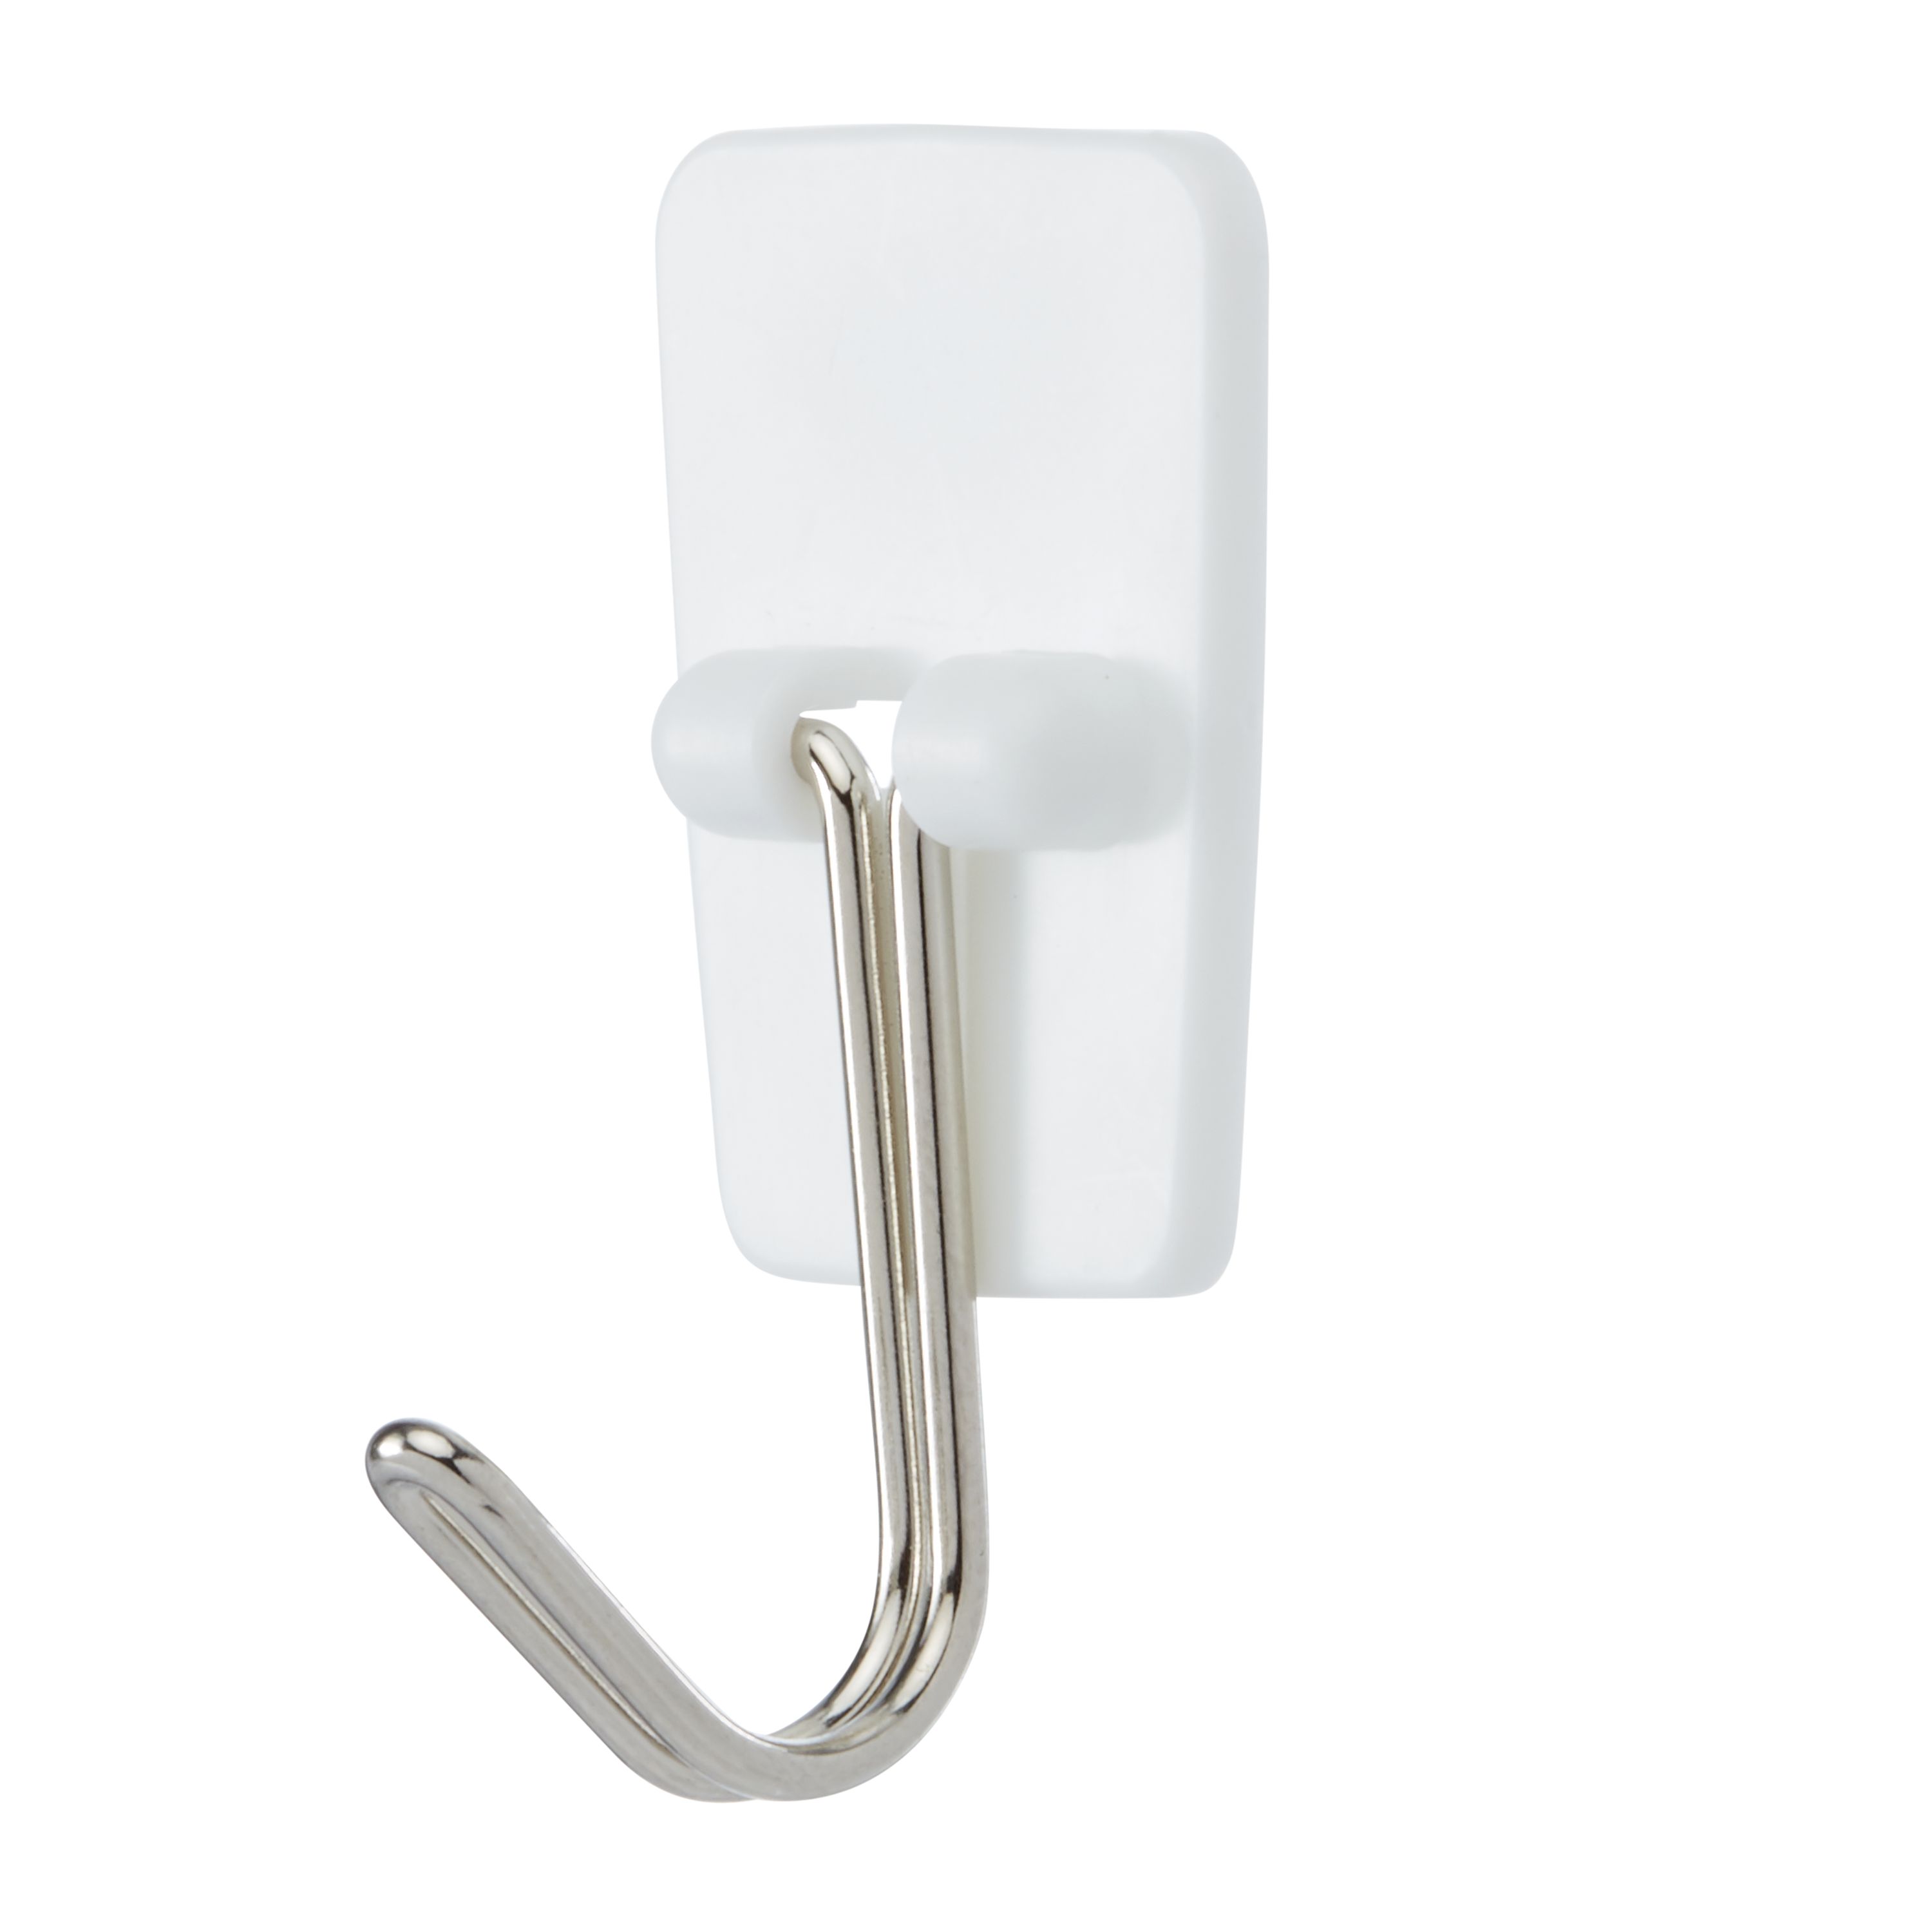 3M Command Medium White Wire hook (Holds)1.3kg, Pack of 2